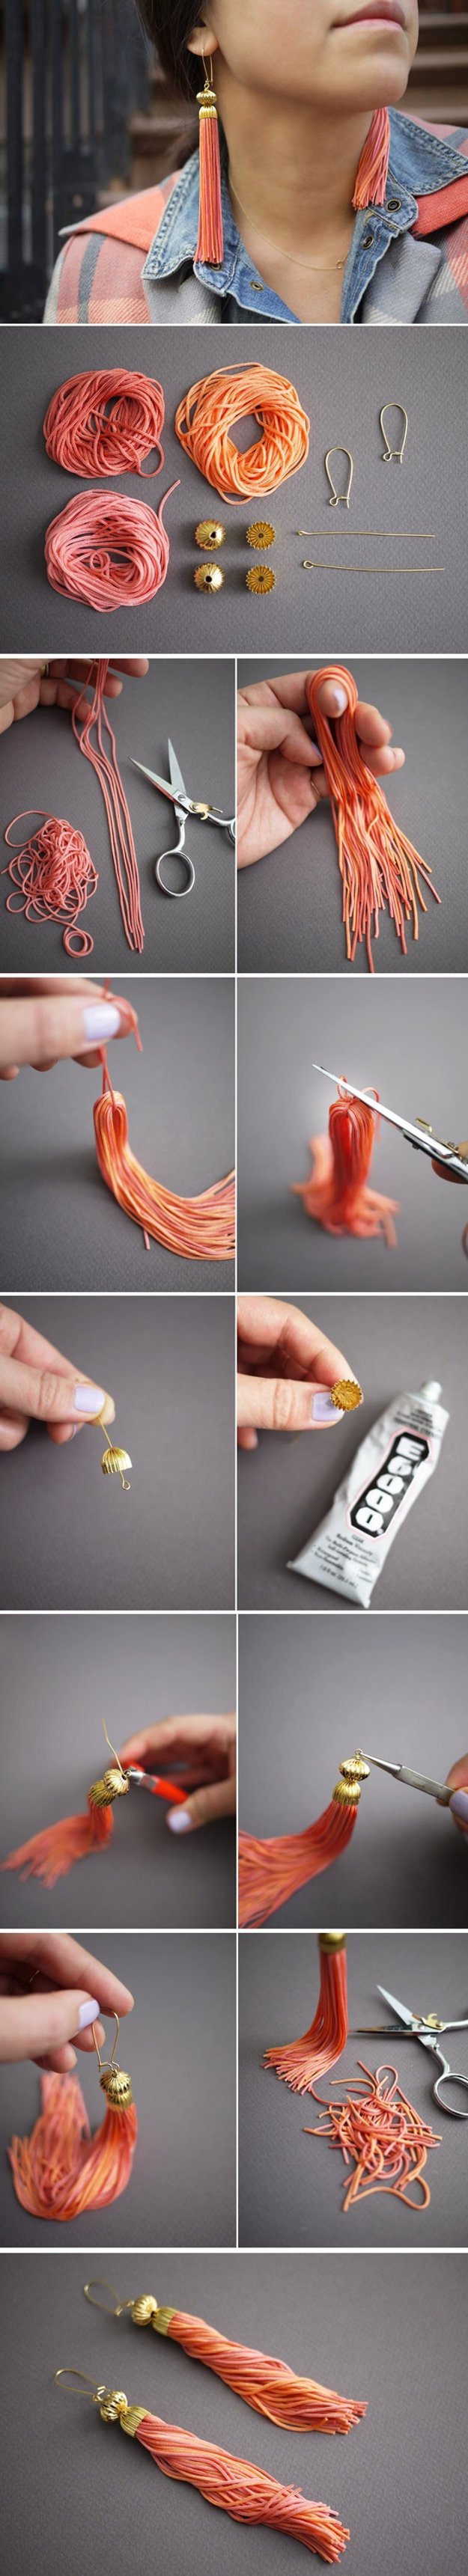 Step-by-step guide on how to make tassel earrings